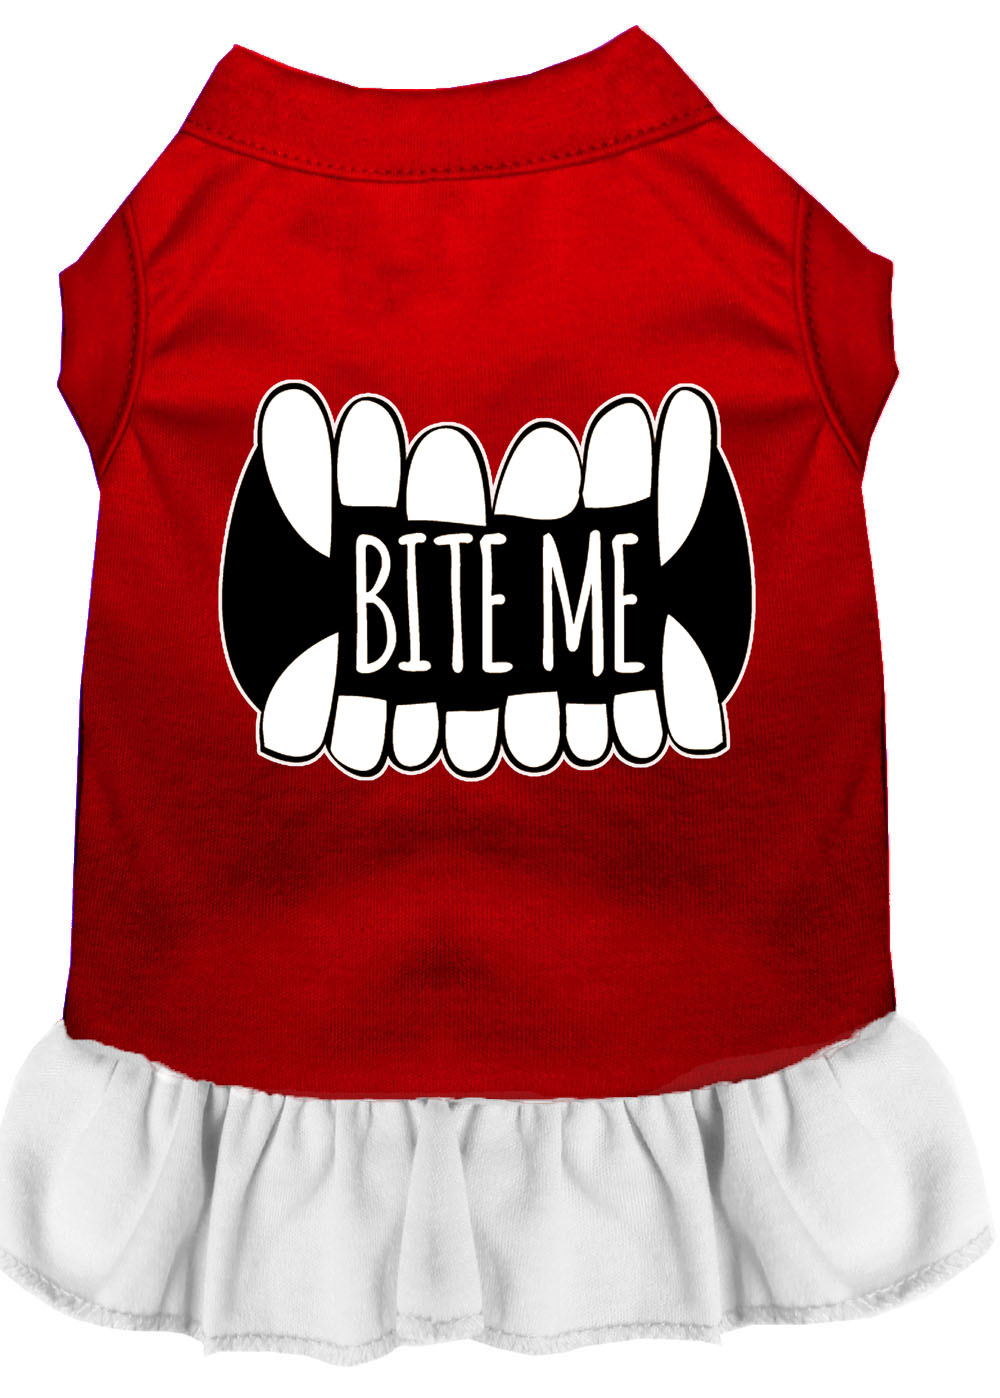 Bite Me Screen Print Dog Dress Red with White Lg